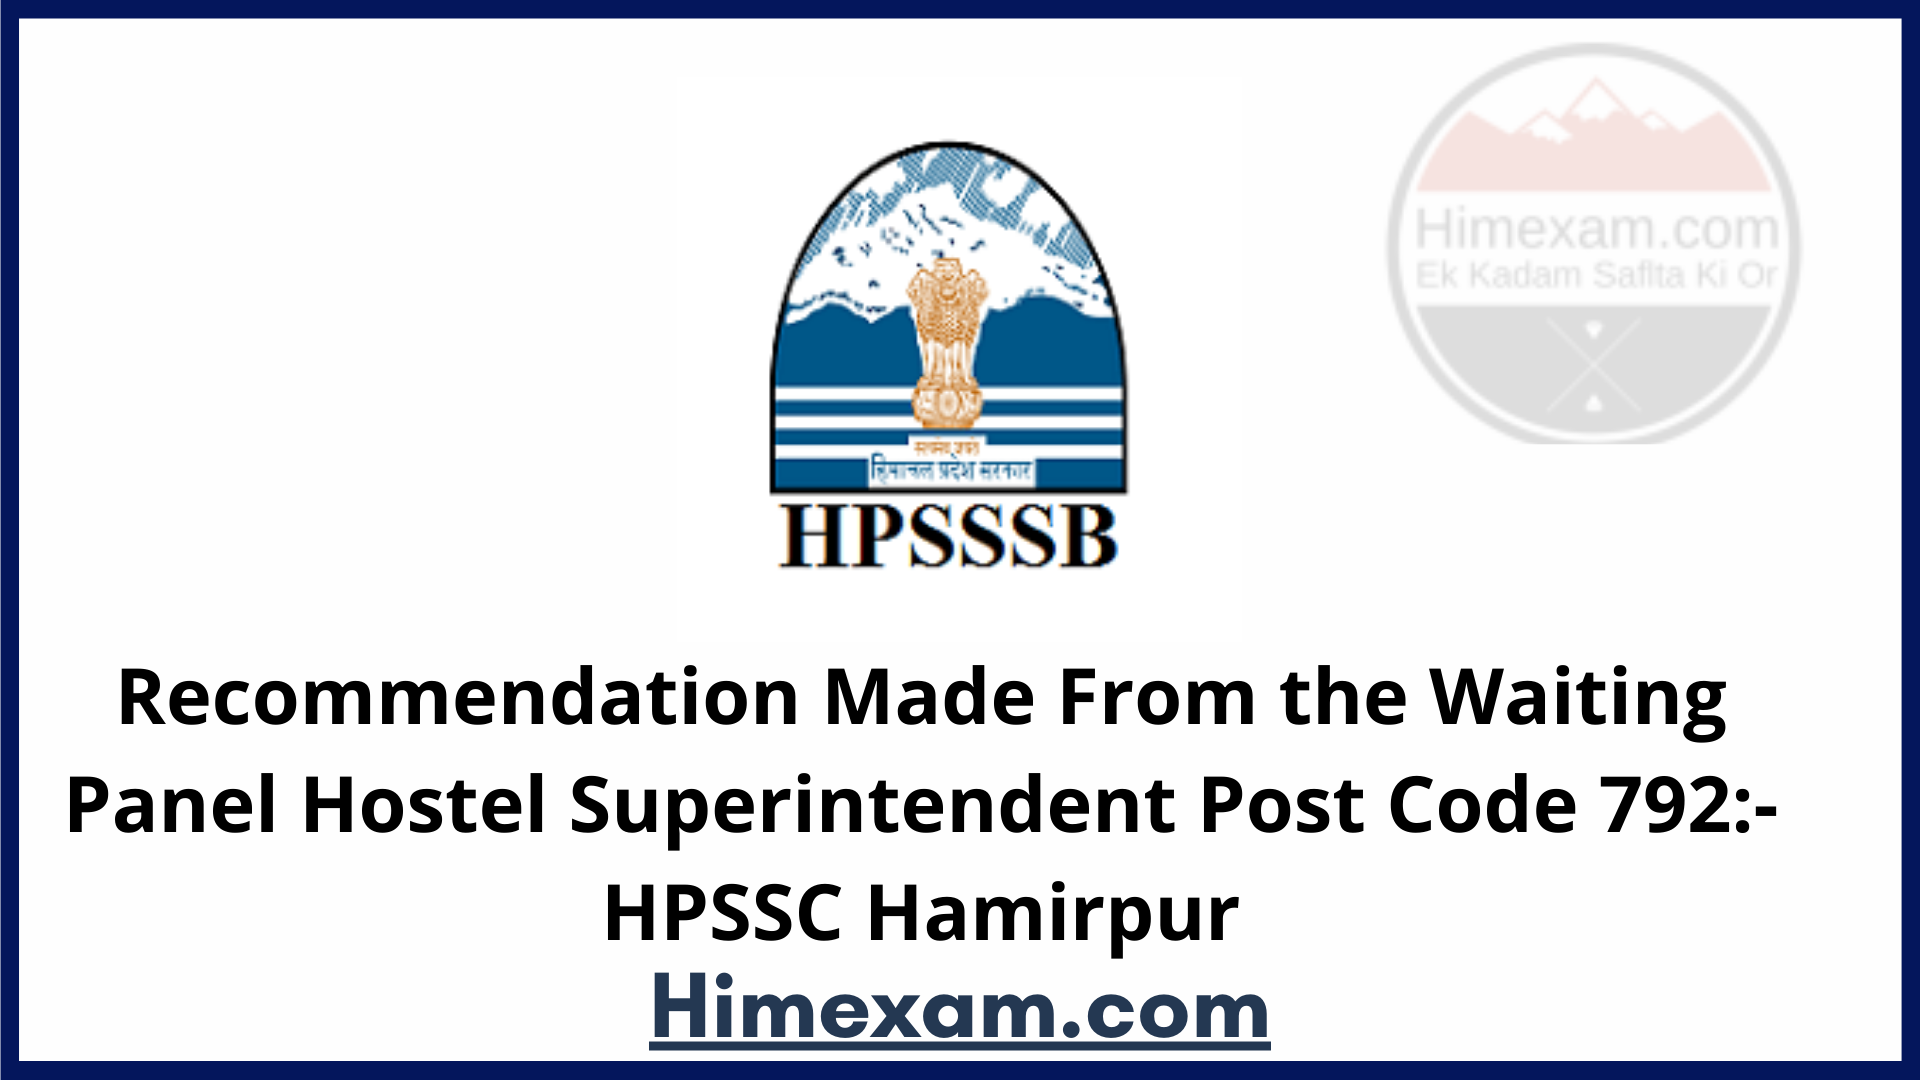 Recommendation Made From the Waiting Panel Hostel Superintendent Post Code 792:- HPSSC Hamirpur